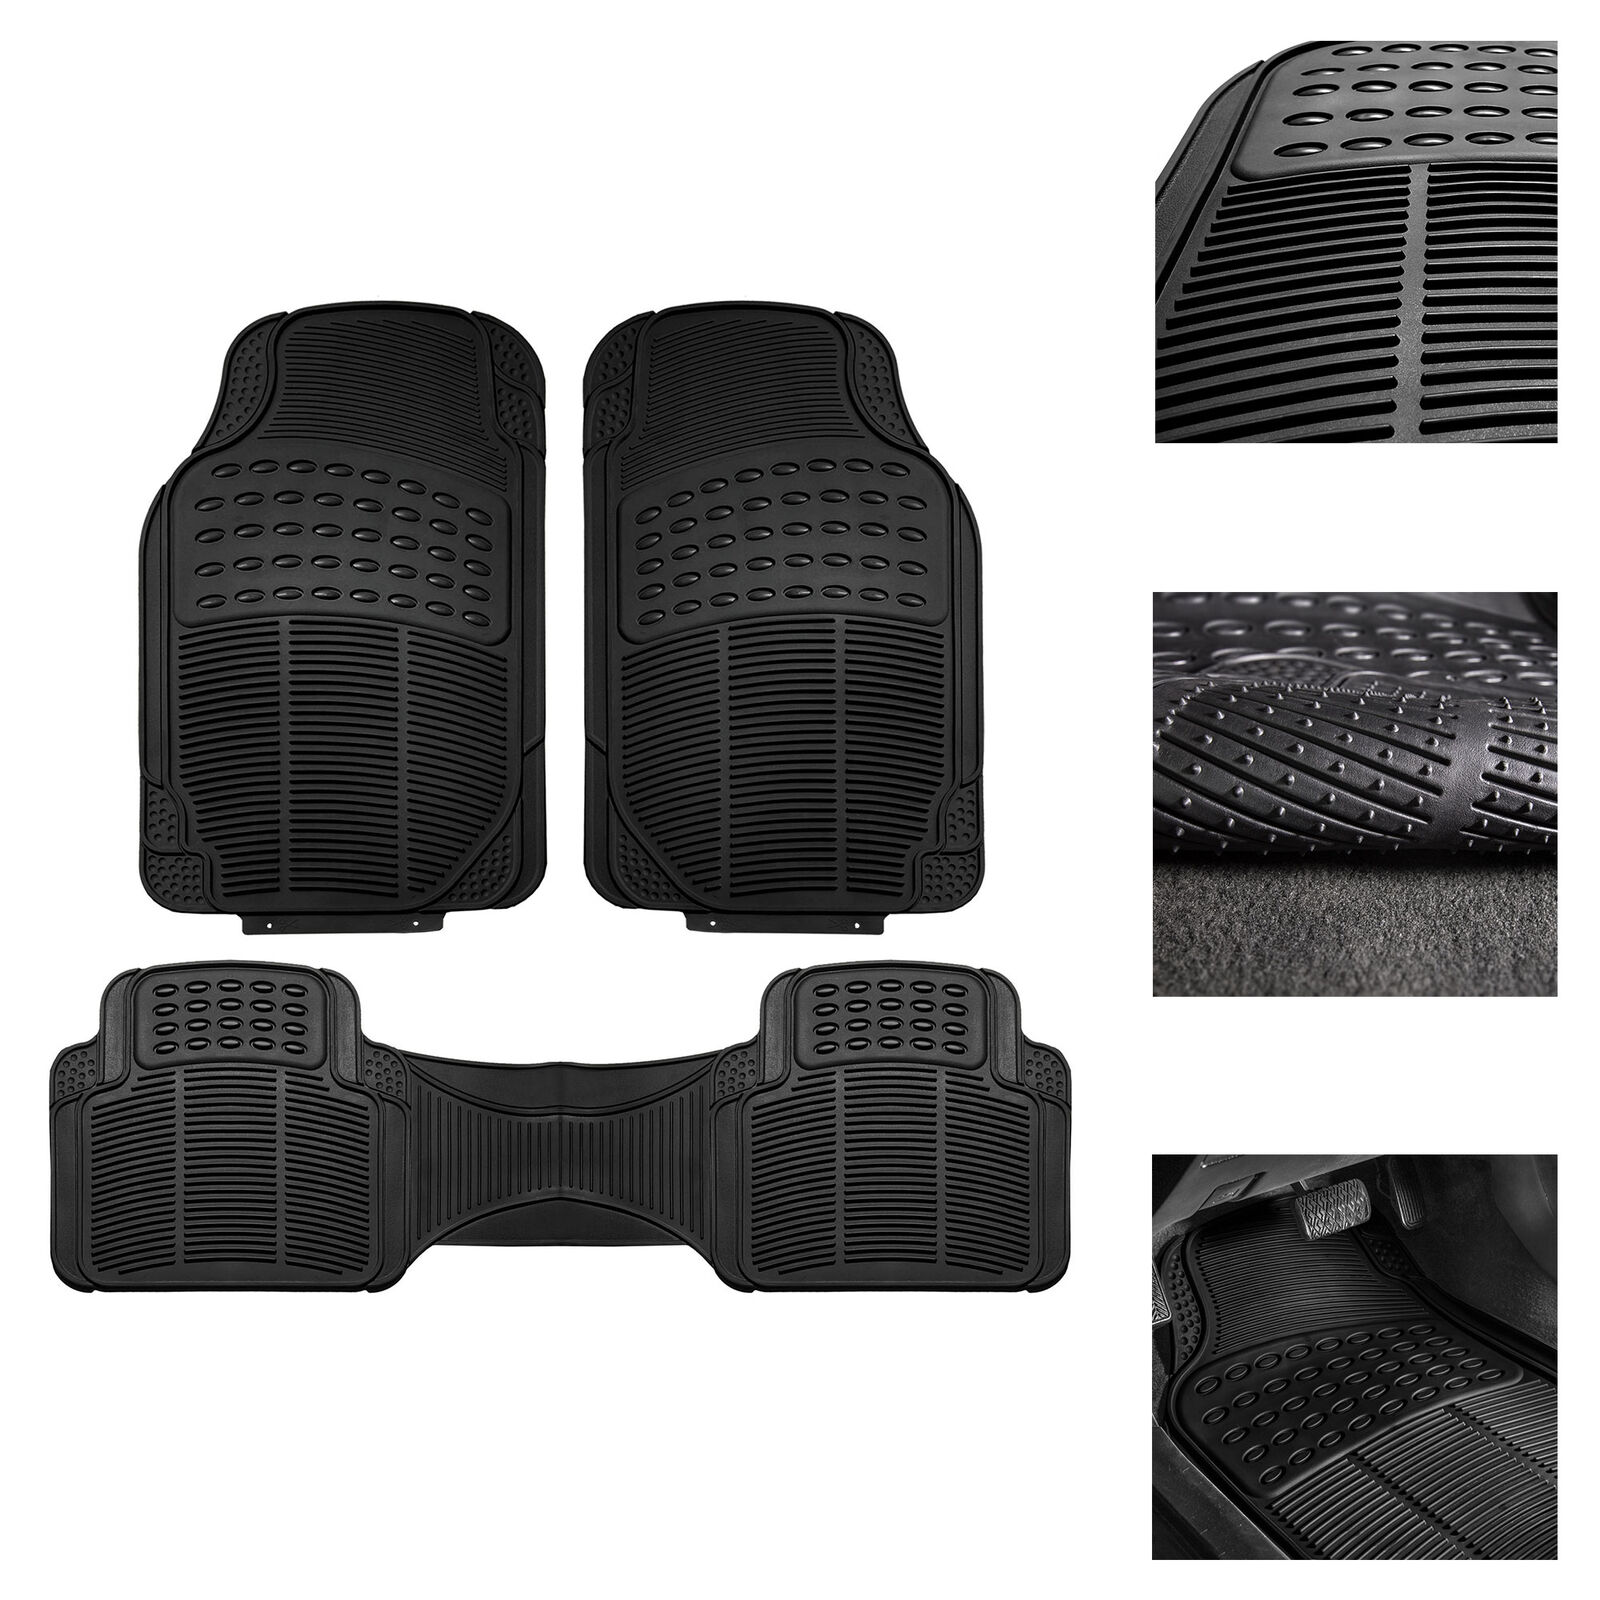 Car Floor Mats, All Weather Rubber Tactical Fit Heavy Duty Black - 3 Pc Set